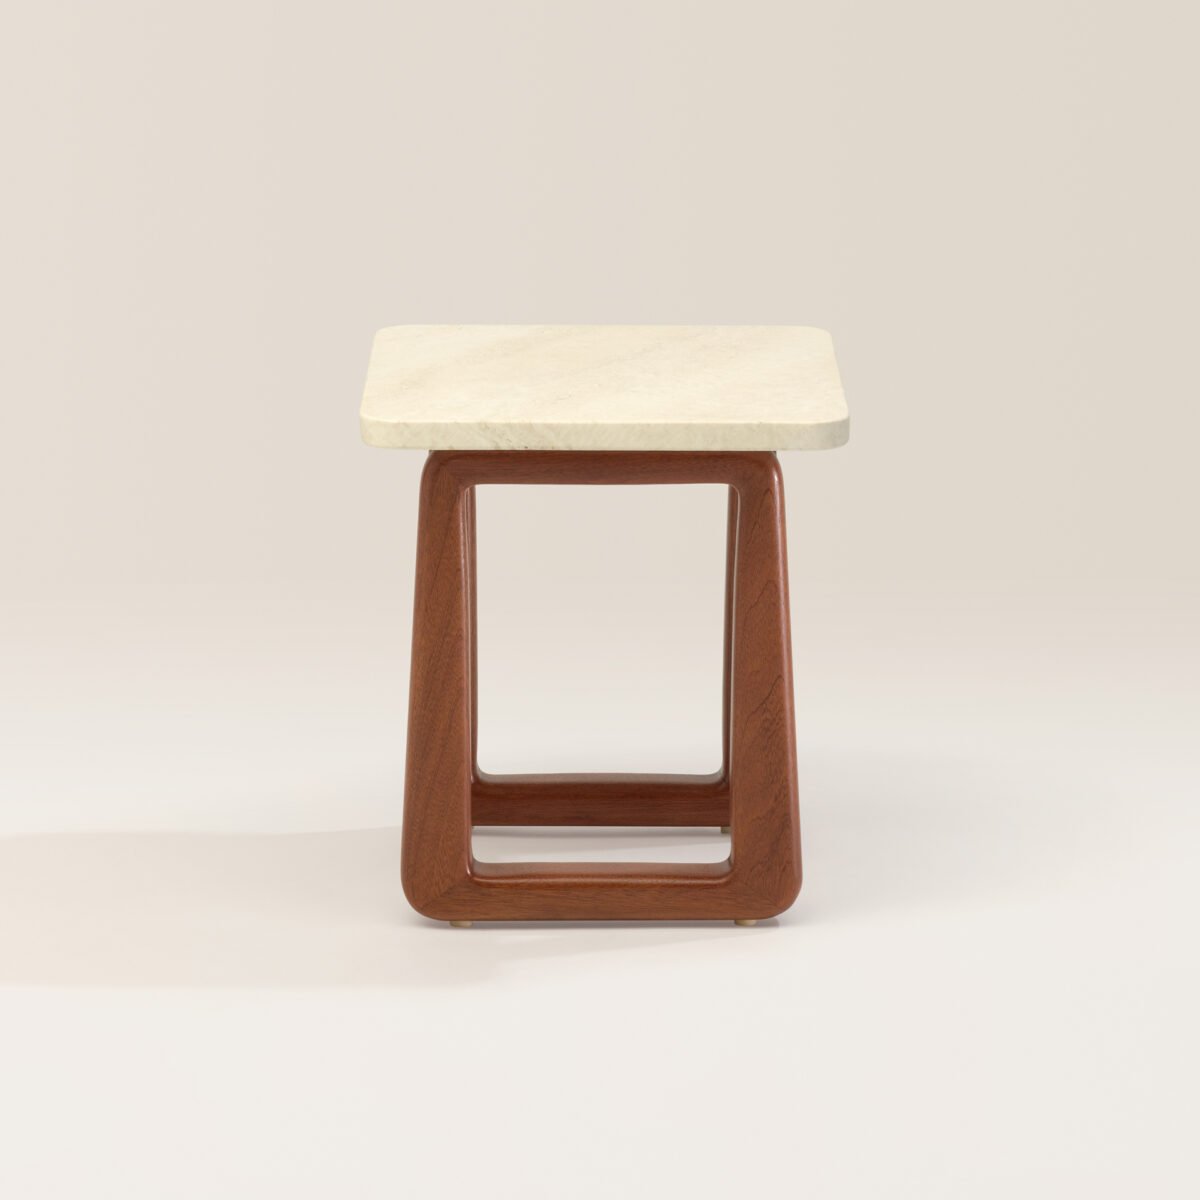 Loro Piana Interiors The Delight chairs by Exteta low side table